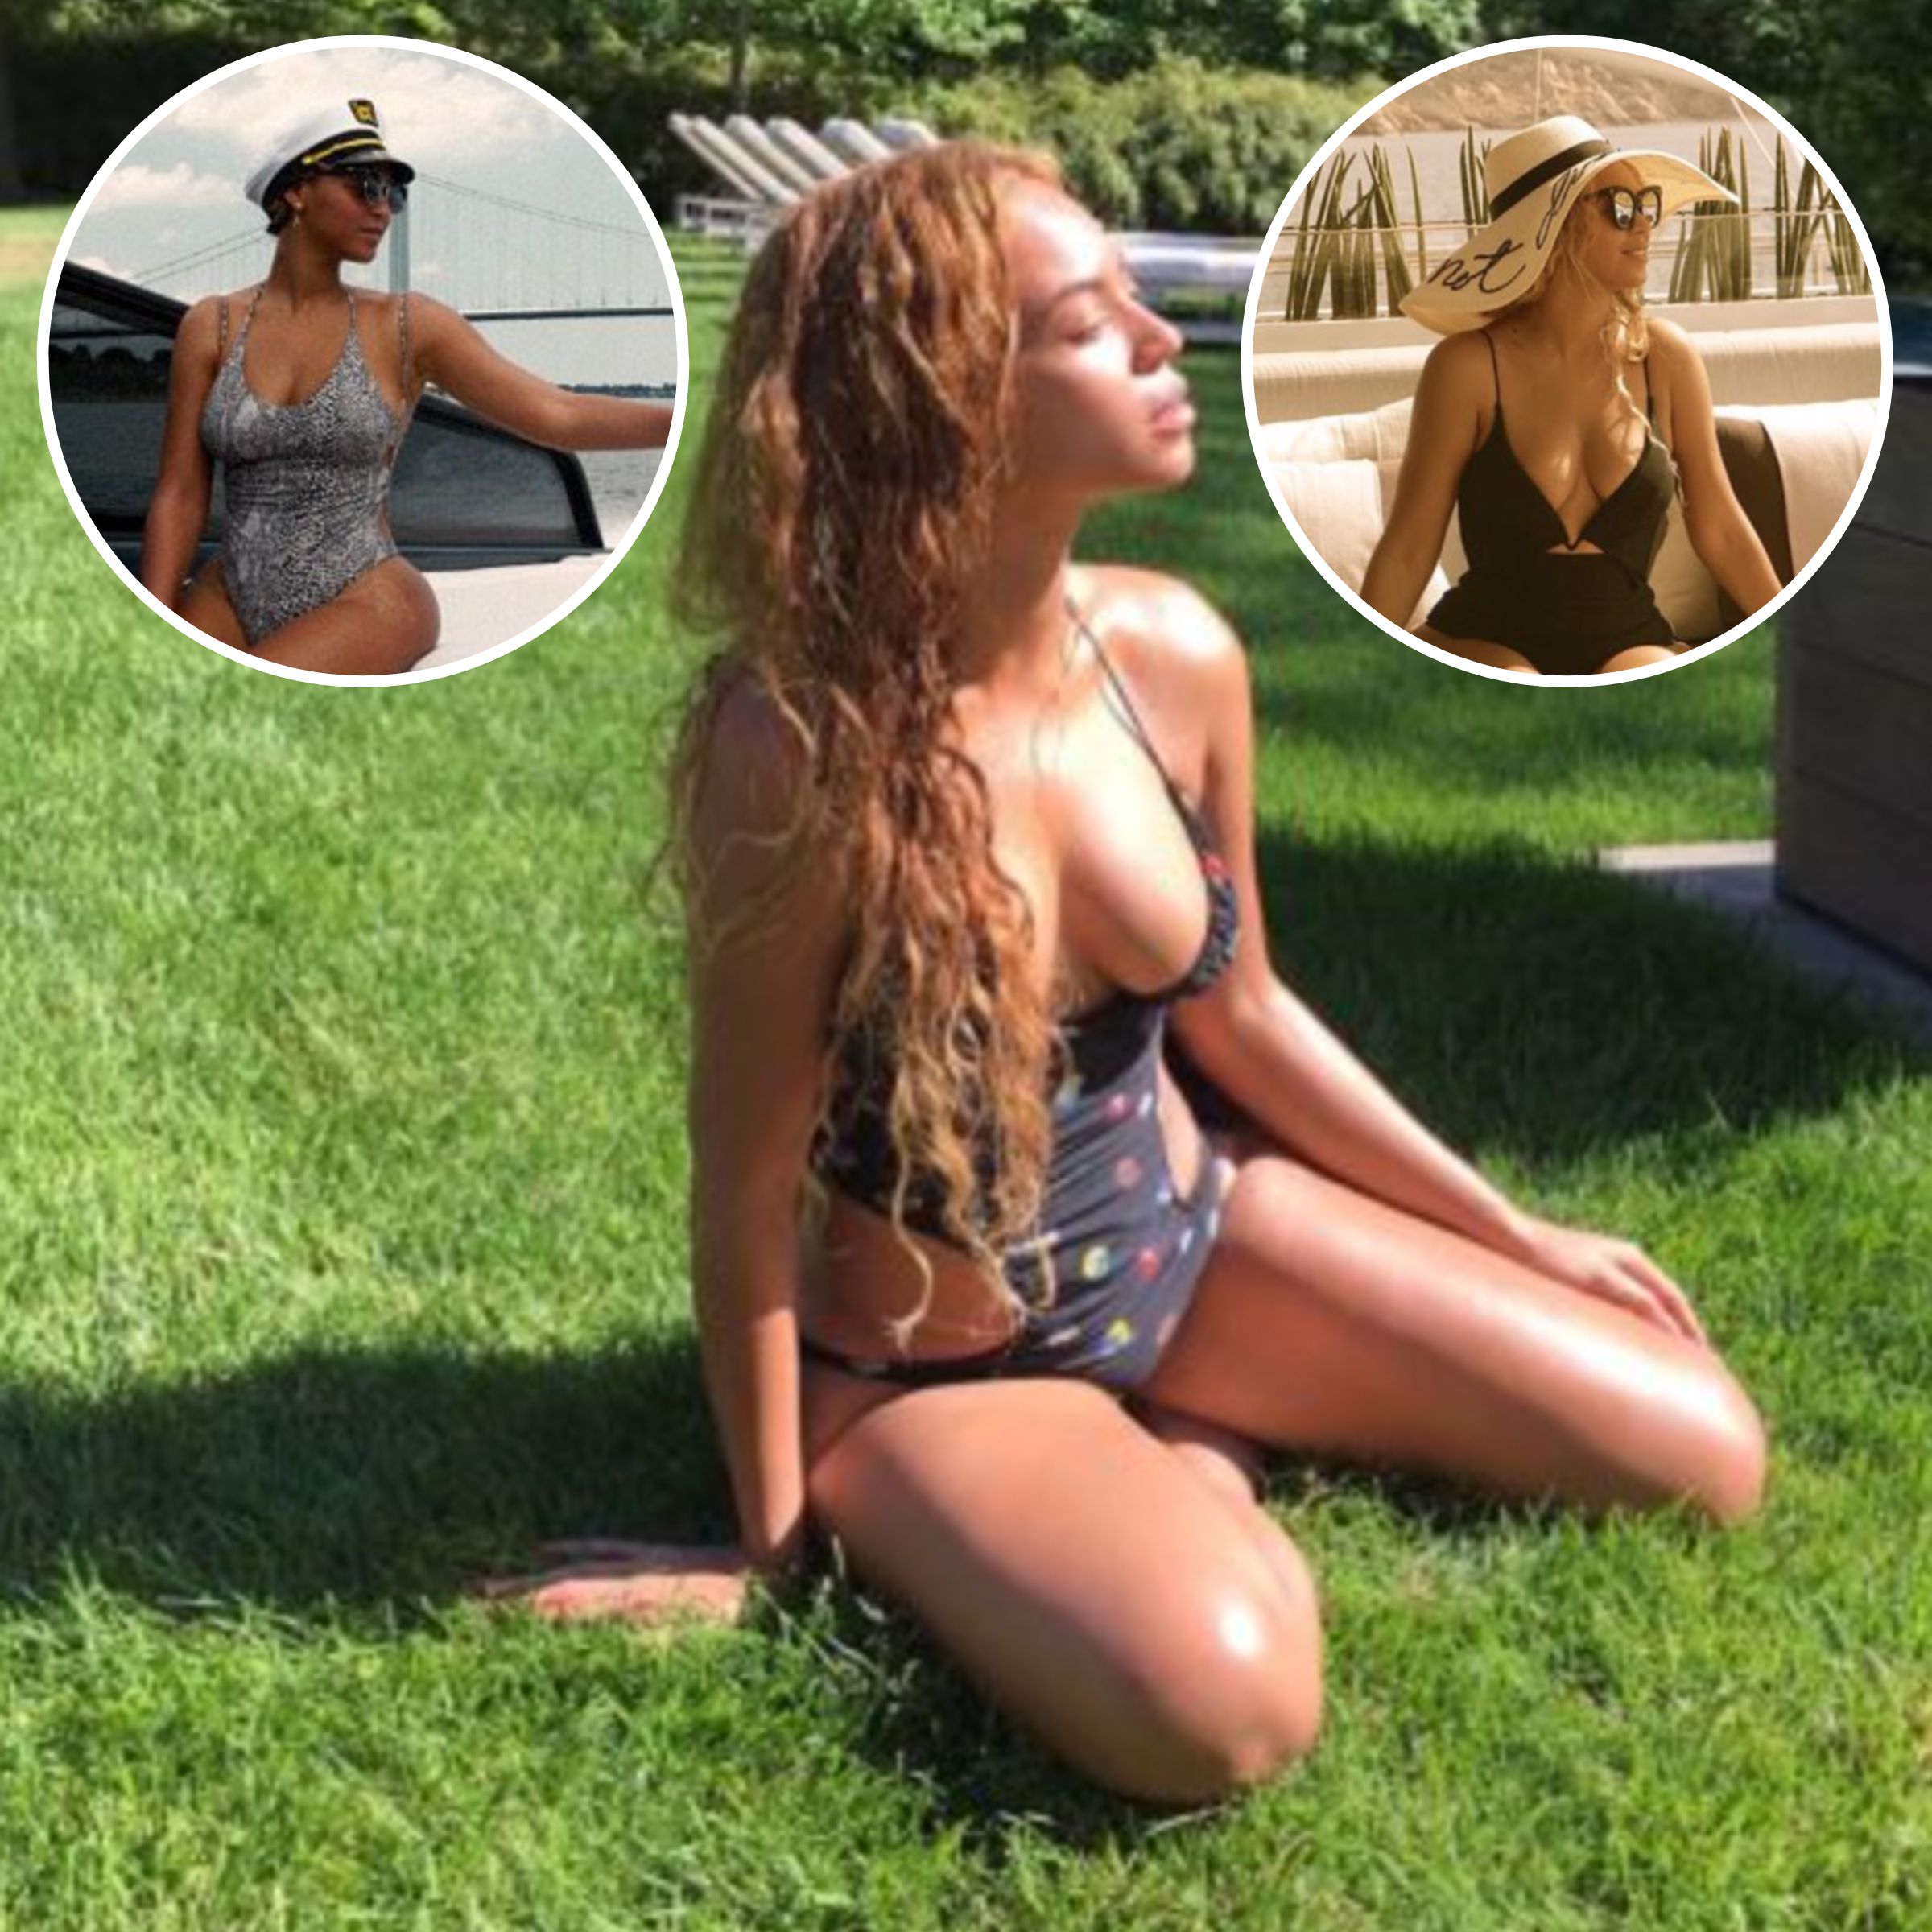 Nude Goddess Beach Body - Beyonce Bikini Photos: Her Sexiest Swimsuit Pictures